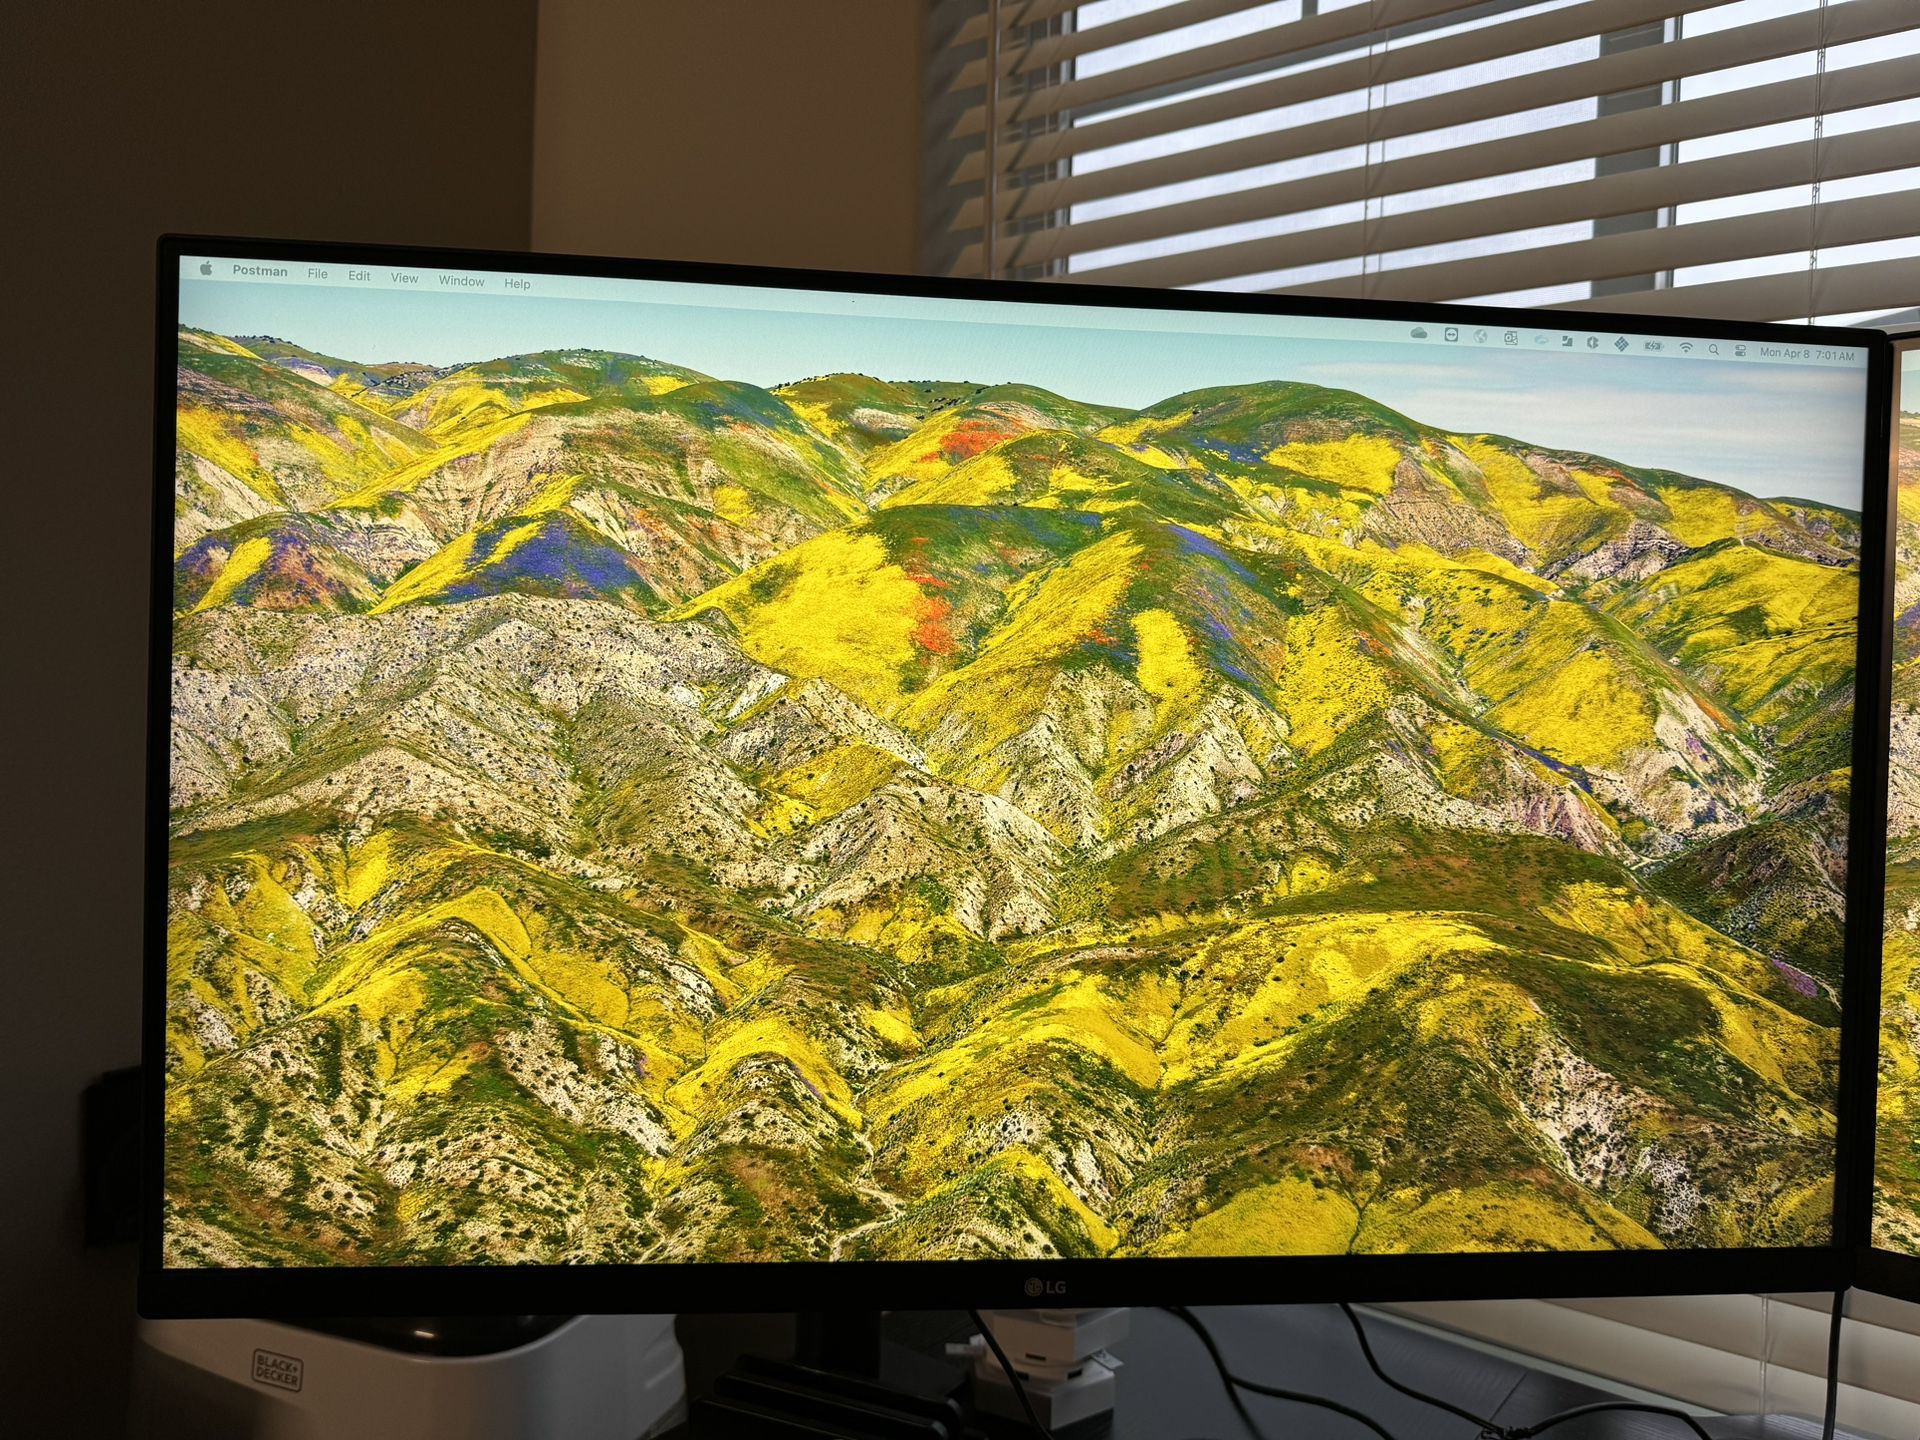 2 *LG Ergo 32 Inch 4k Monitors With Mouting Arms